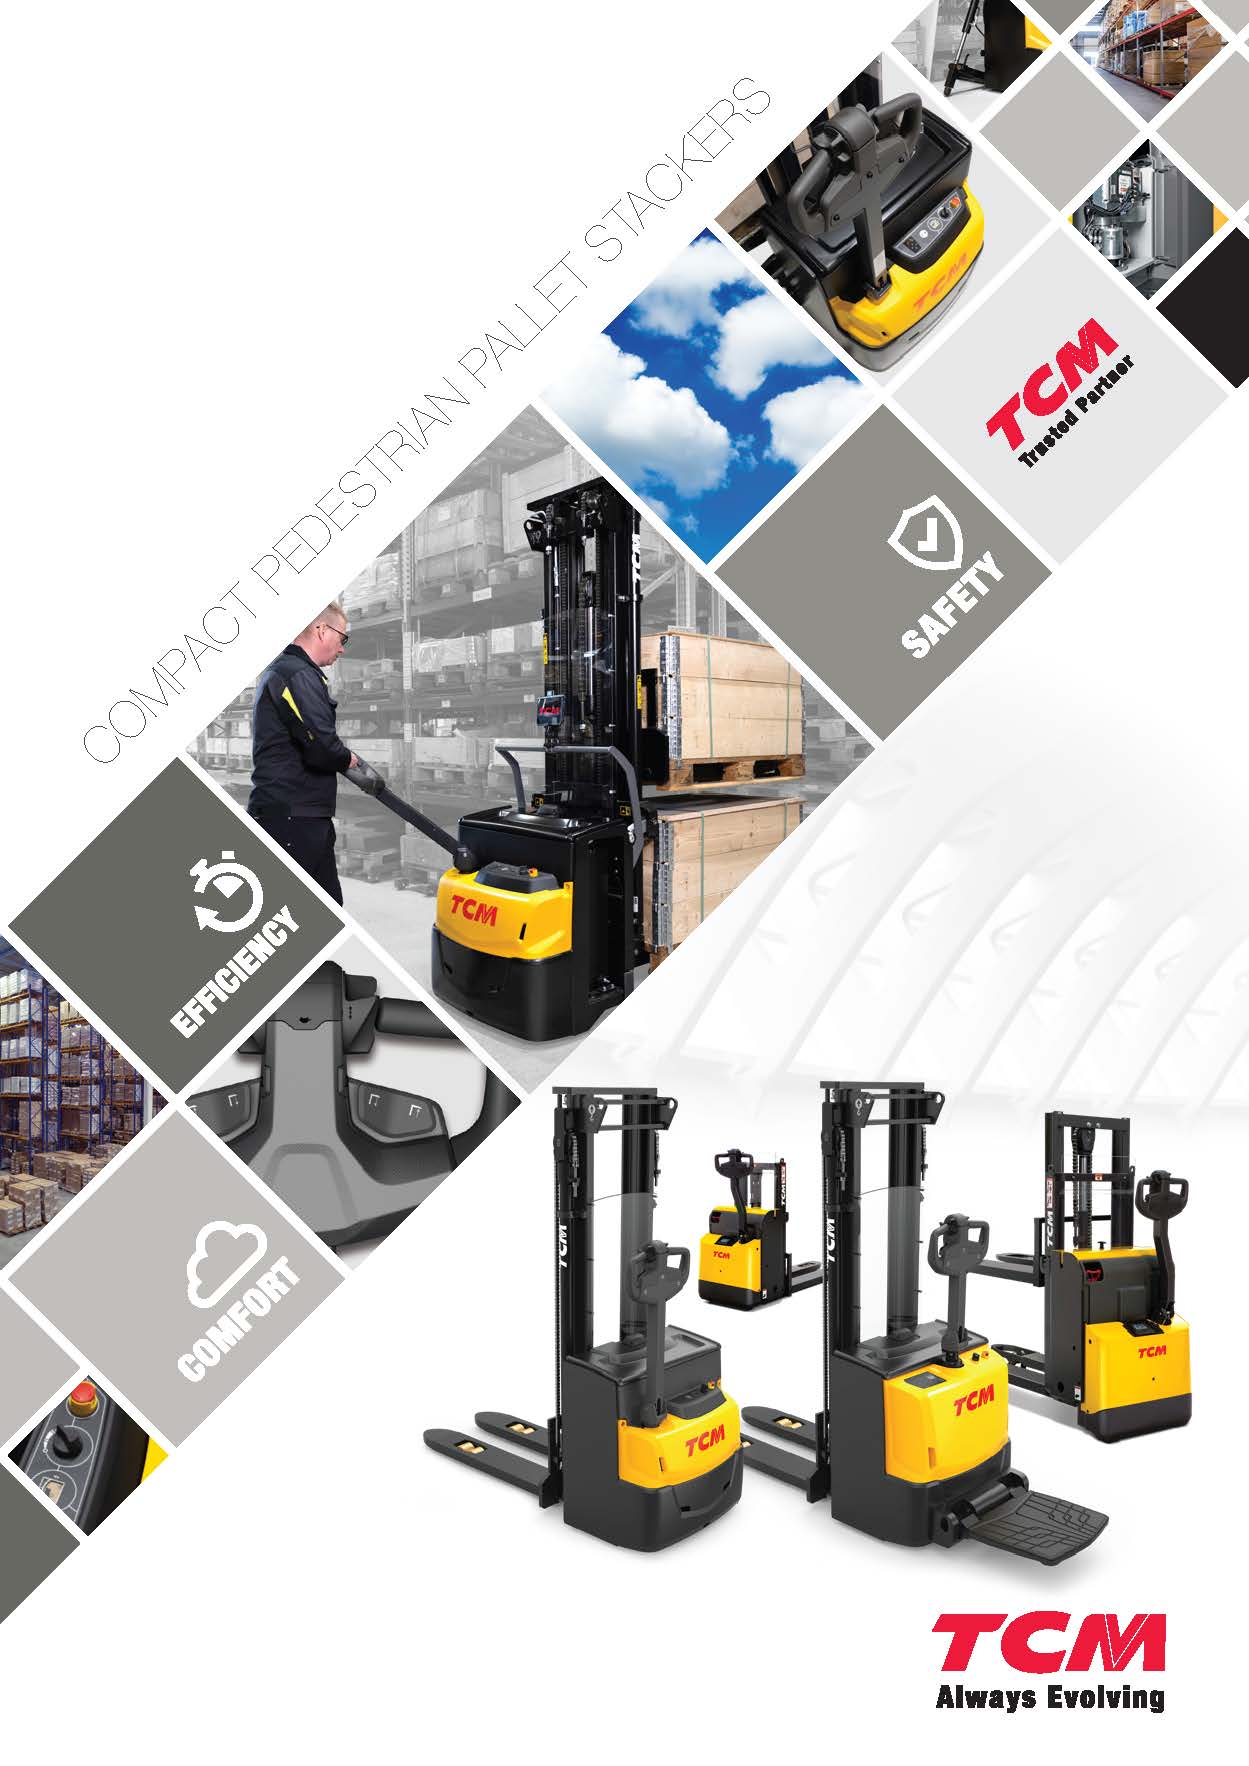 Pages from WEBT2254 - CC6643 - TCM SPW_SPR Compact Pedestrian Pallet Stackers 8pp Brochure_SINGLE PAGES_150dpi 30AUG22 (1)